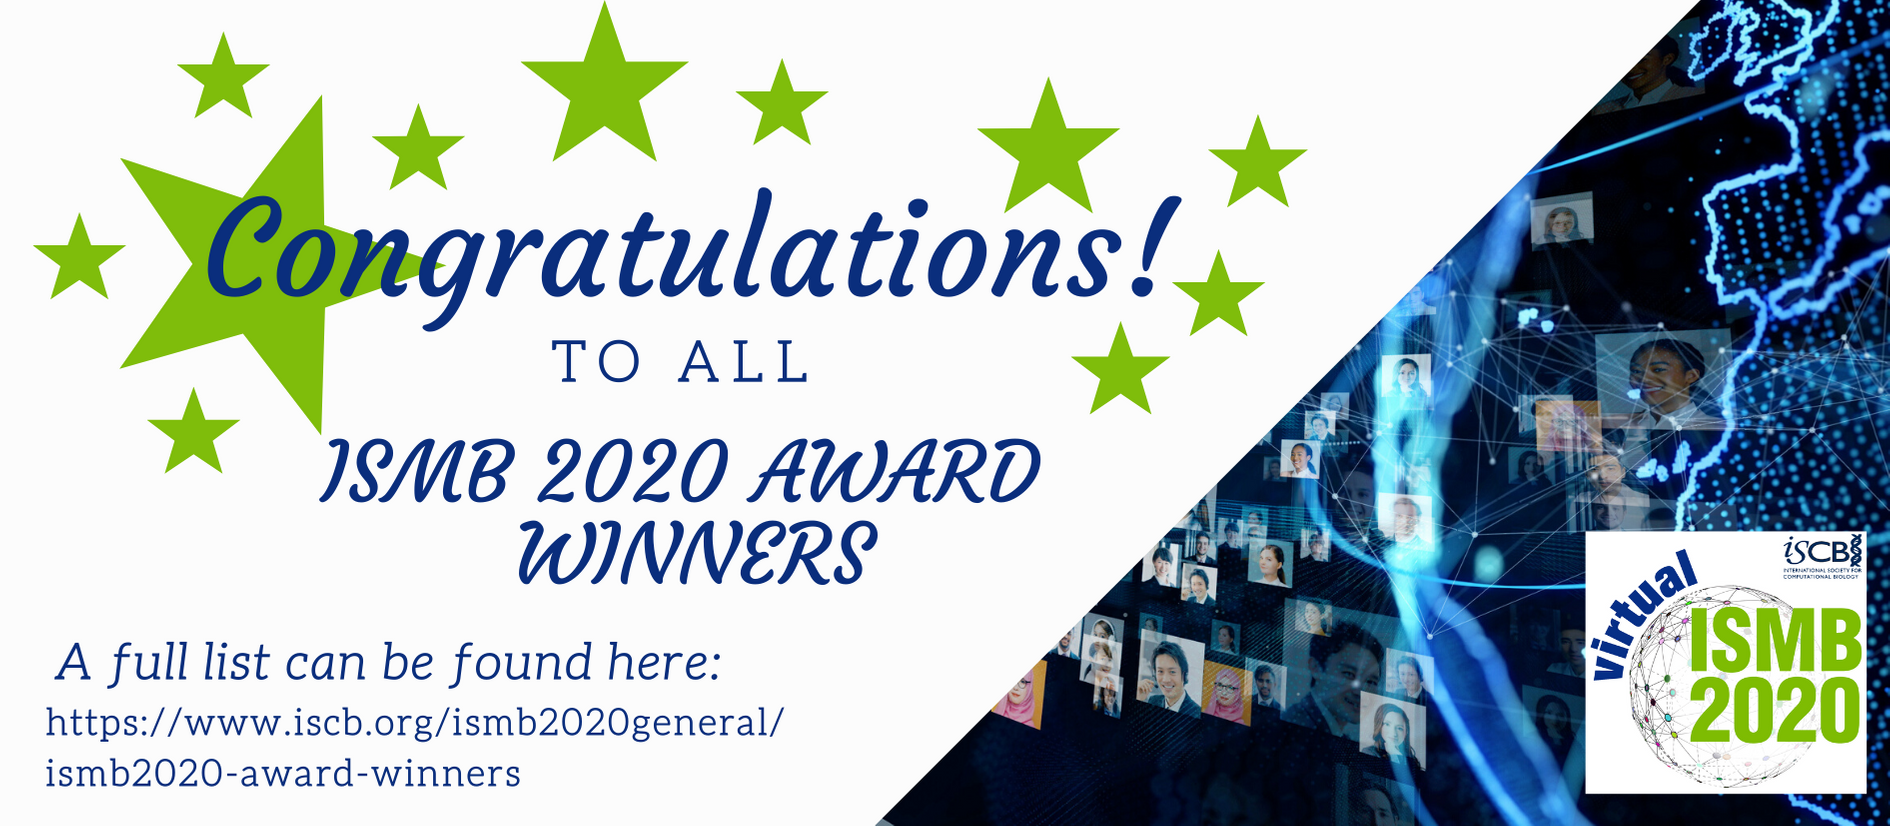 Congratulations to all the ISMB 2020 award winners!